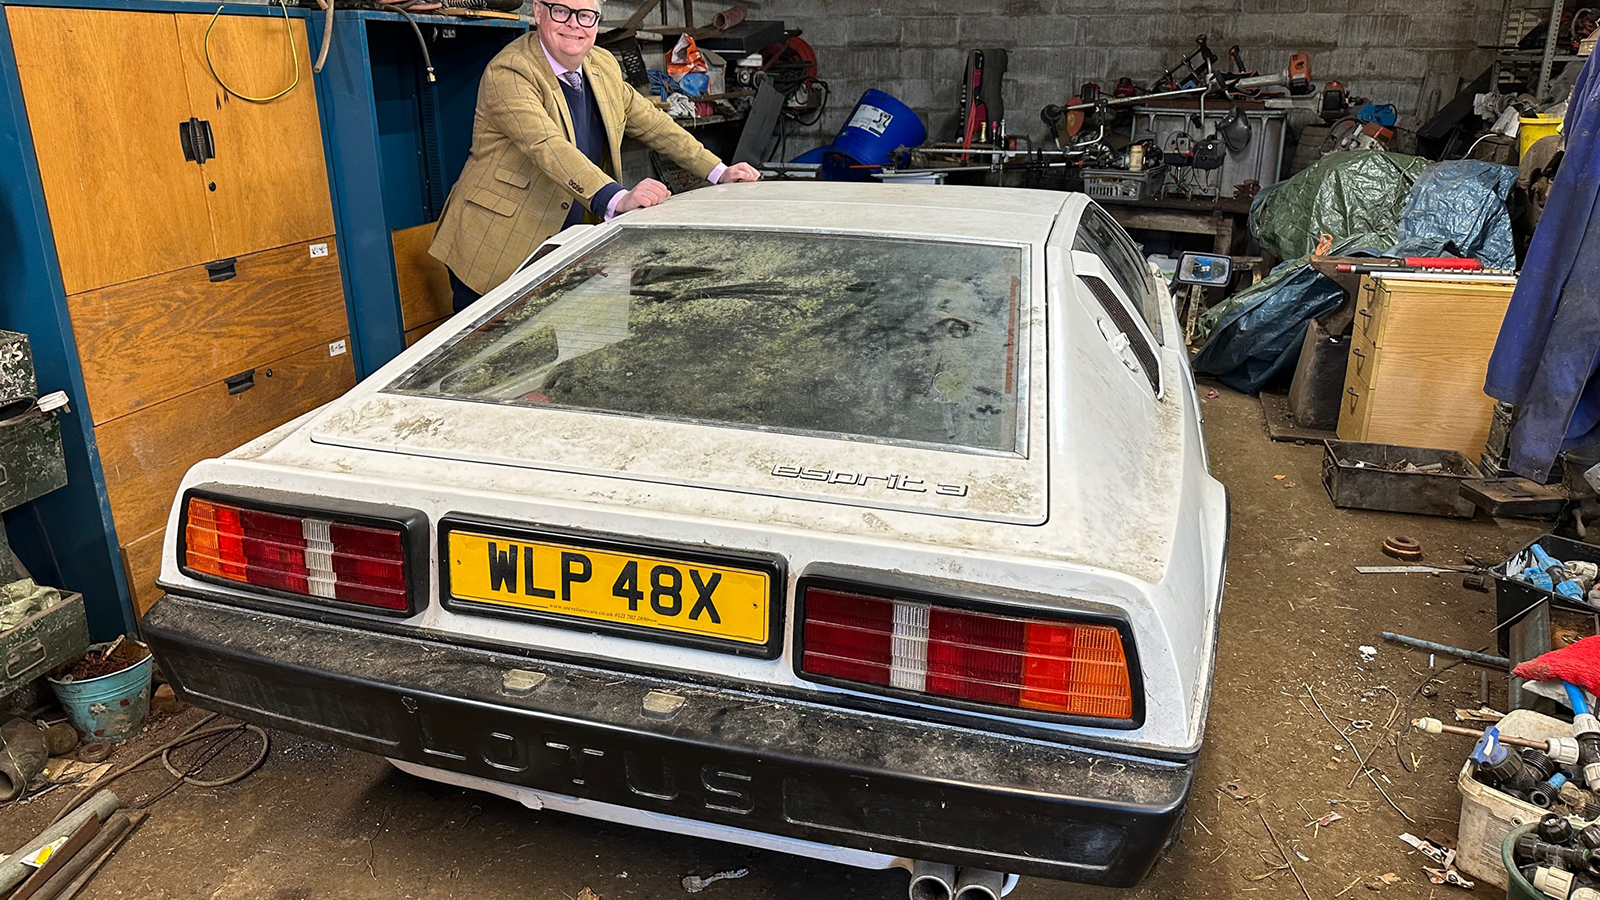 This barn-find Lotus Esprit could be yours